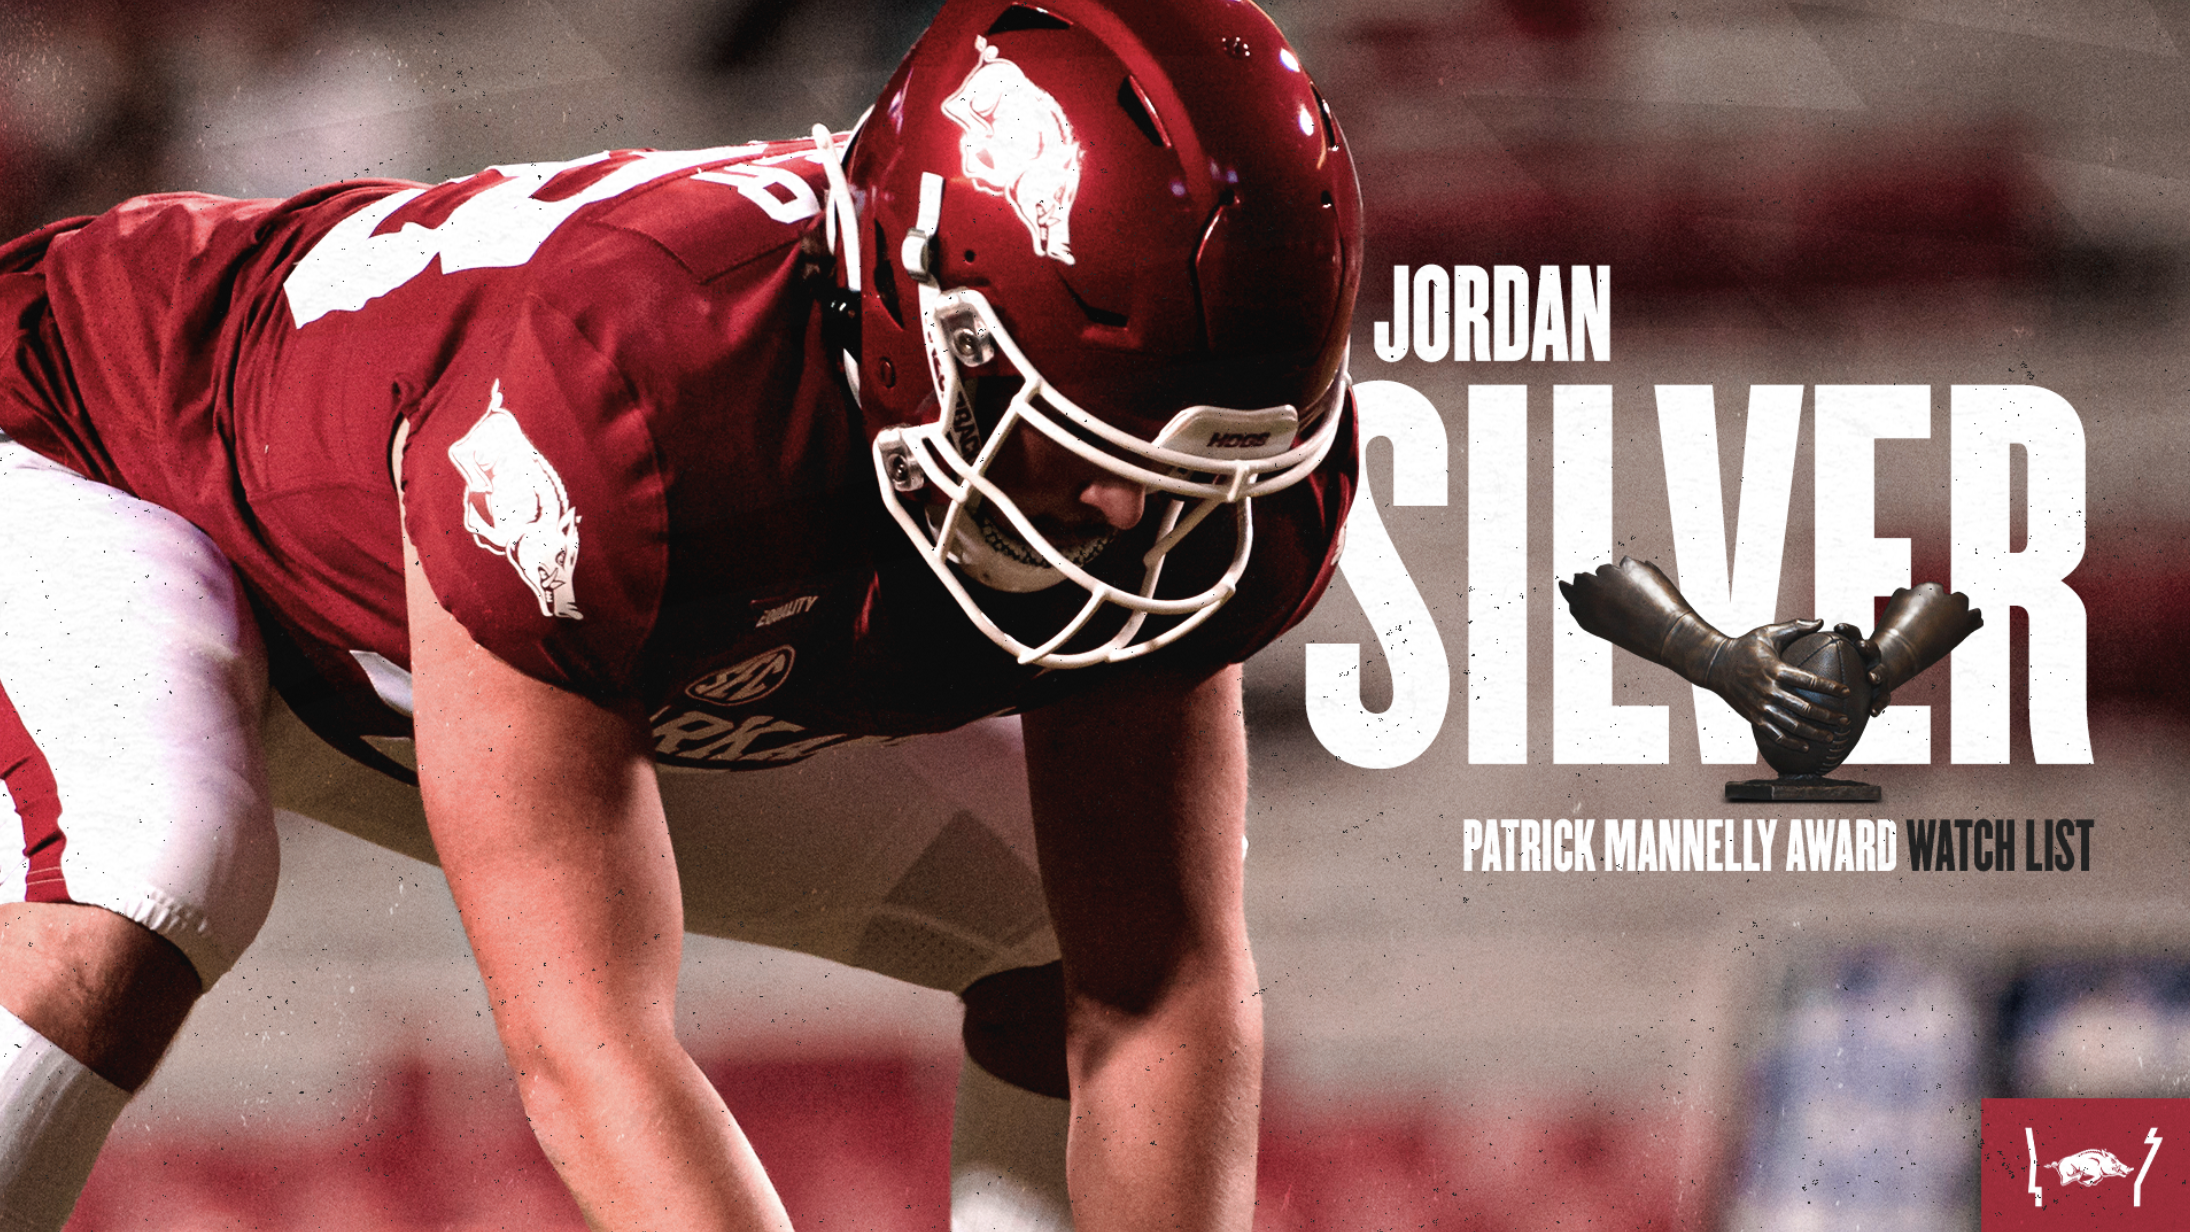 Silver Tabbed To Patrick Mannelly Award Watch List